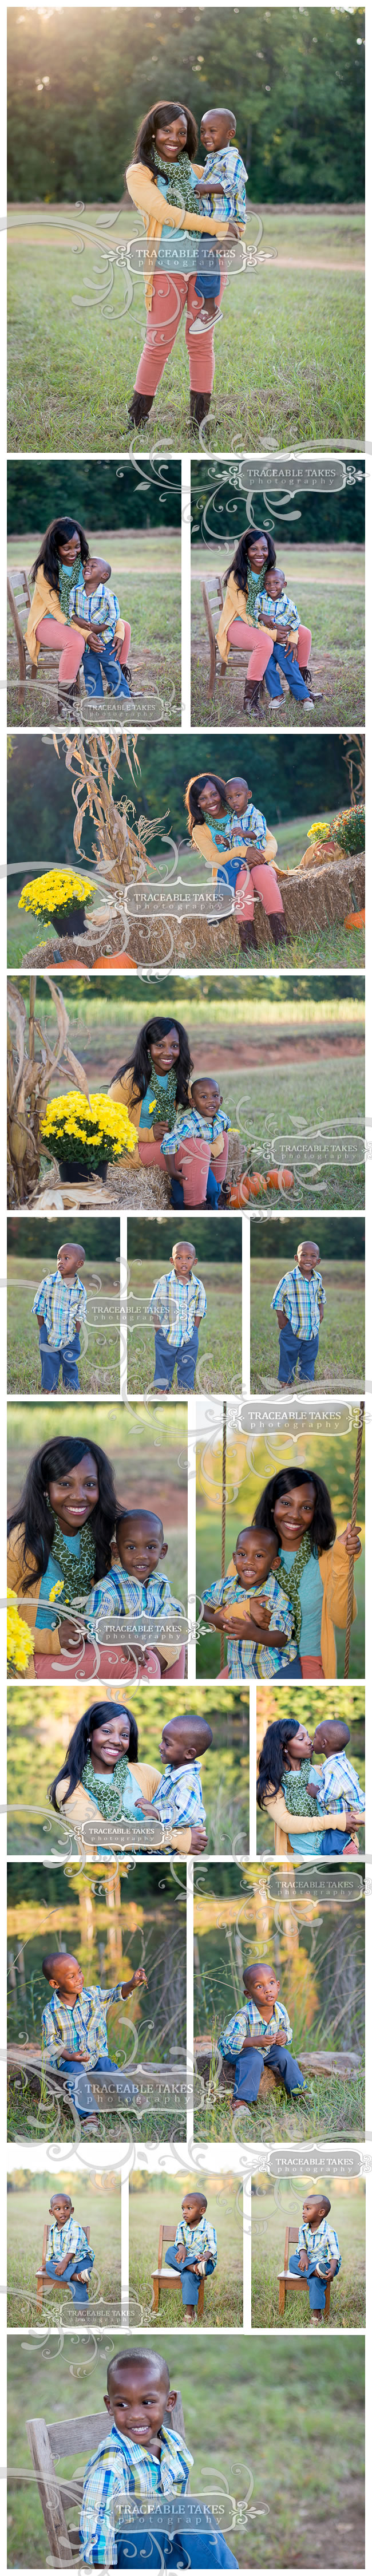 Mommy & Me Fall Photo Shoot